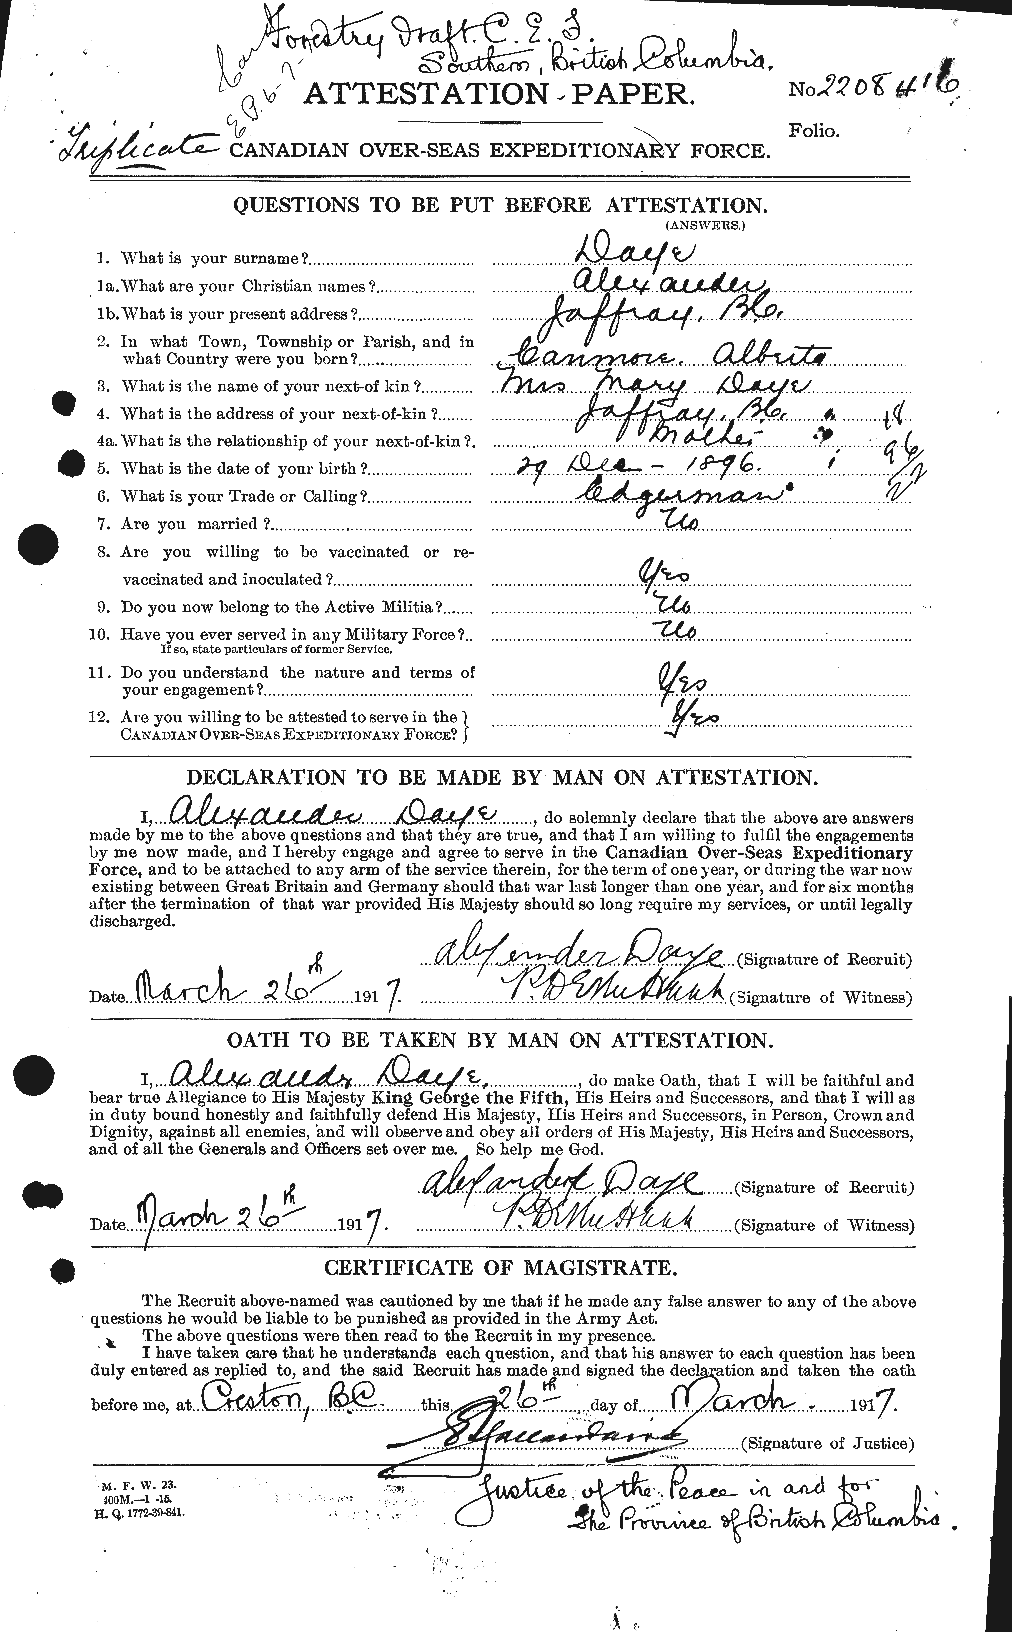 Personnel Records of the First World War - CEF 283558a